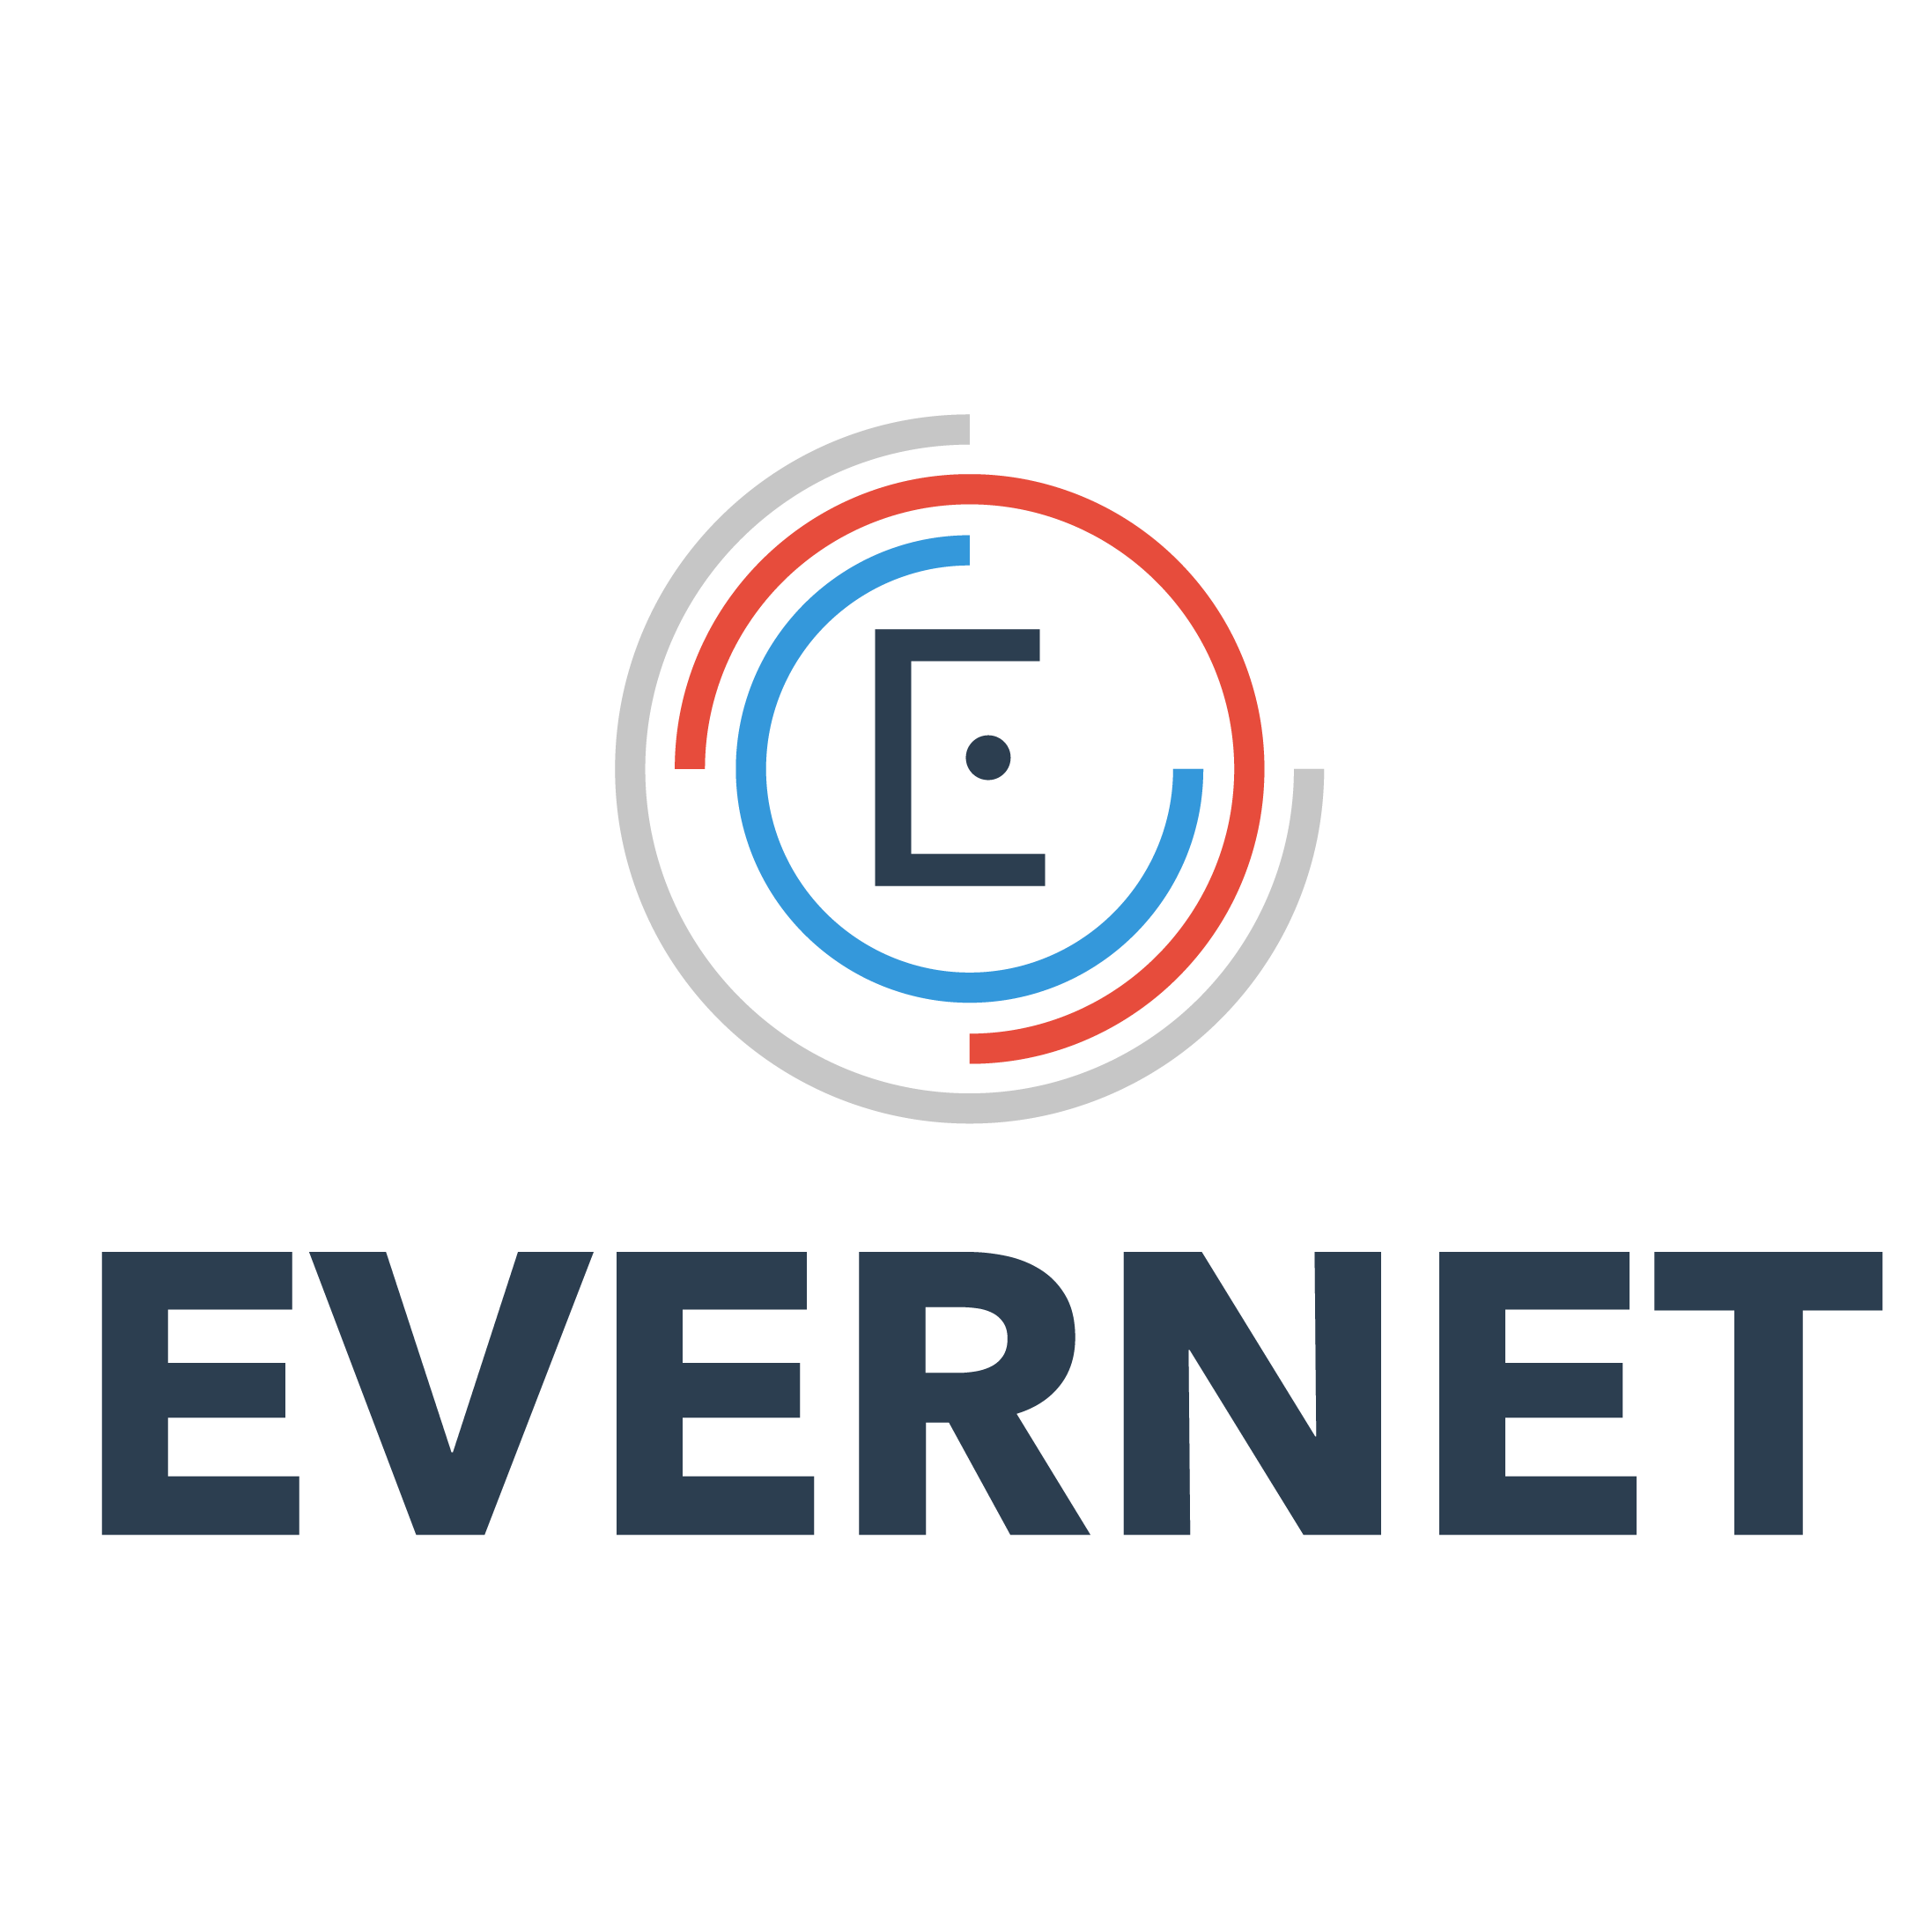 EVERNET Consulting